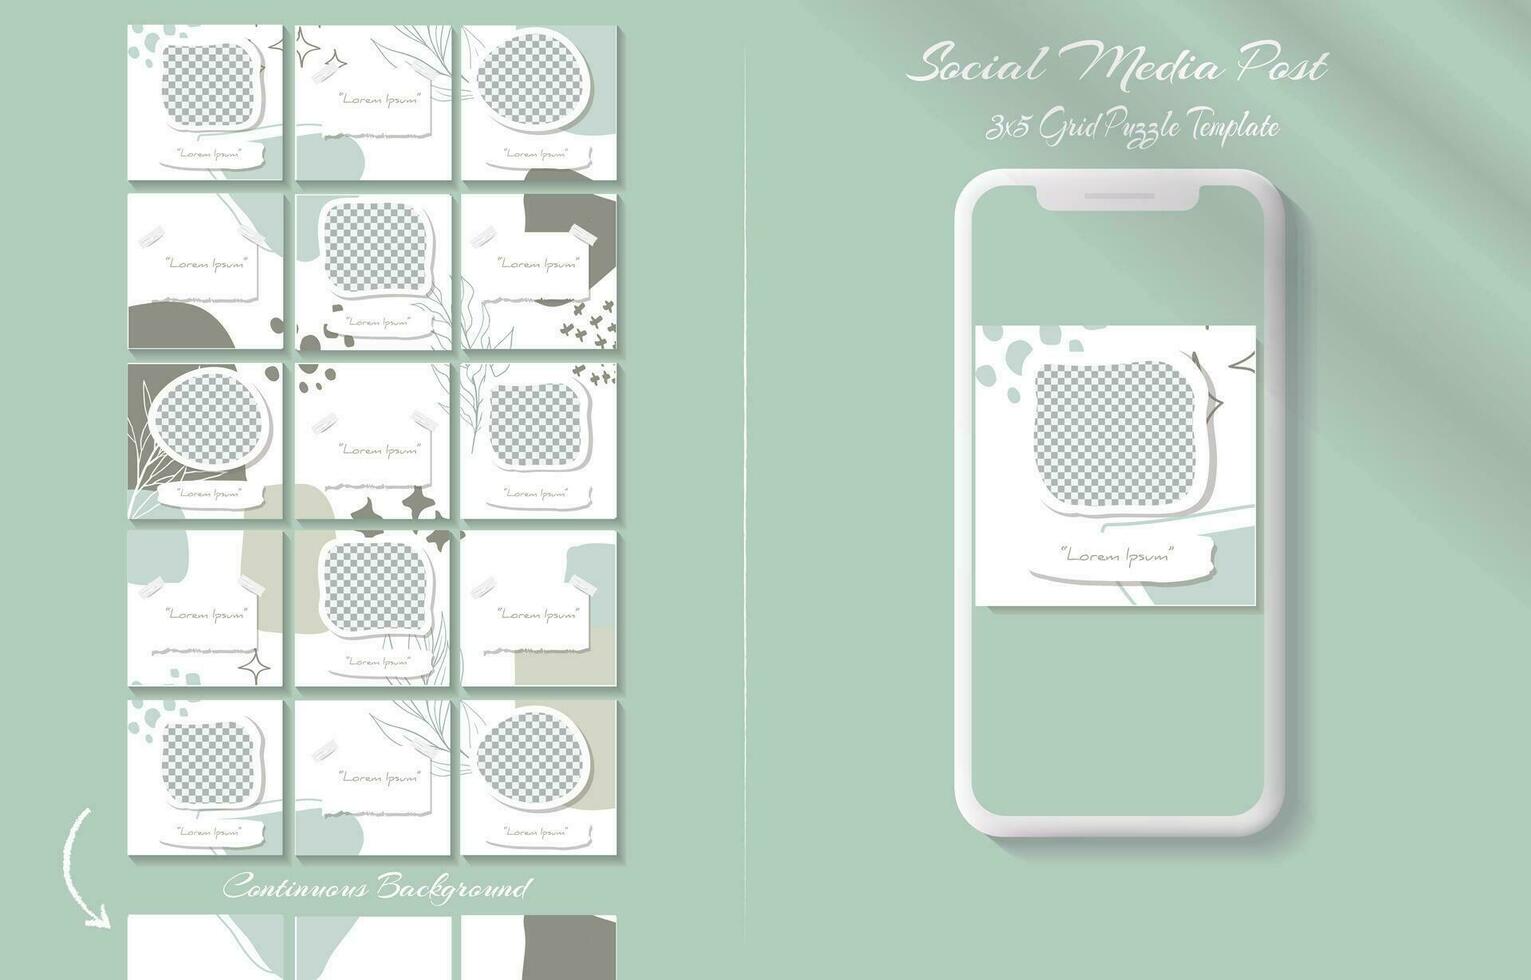 Social media post template in continuous  grid puzzle style vector